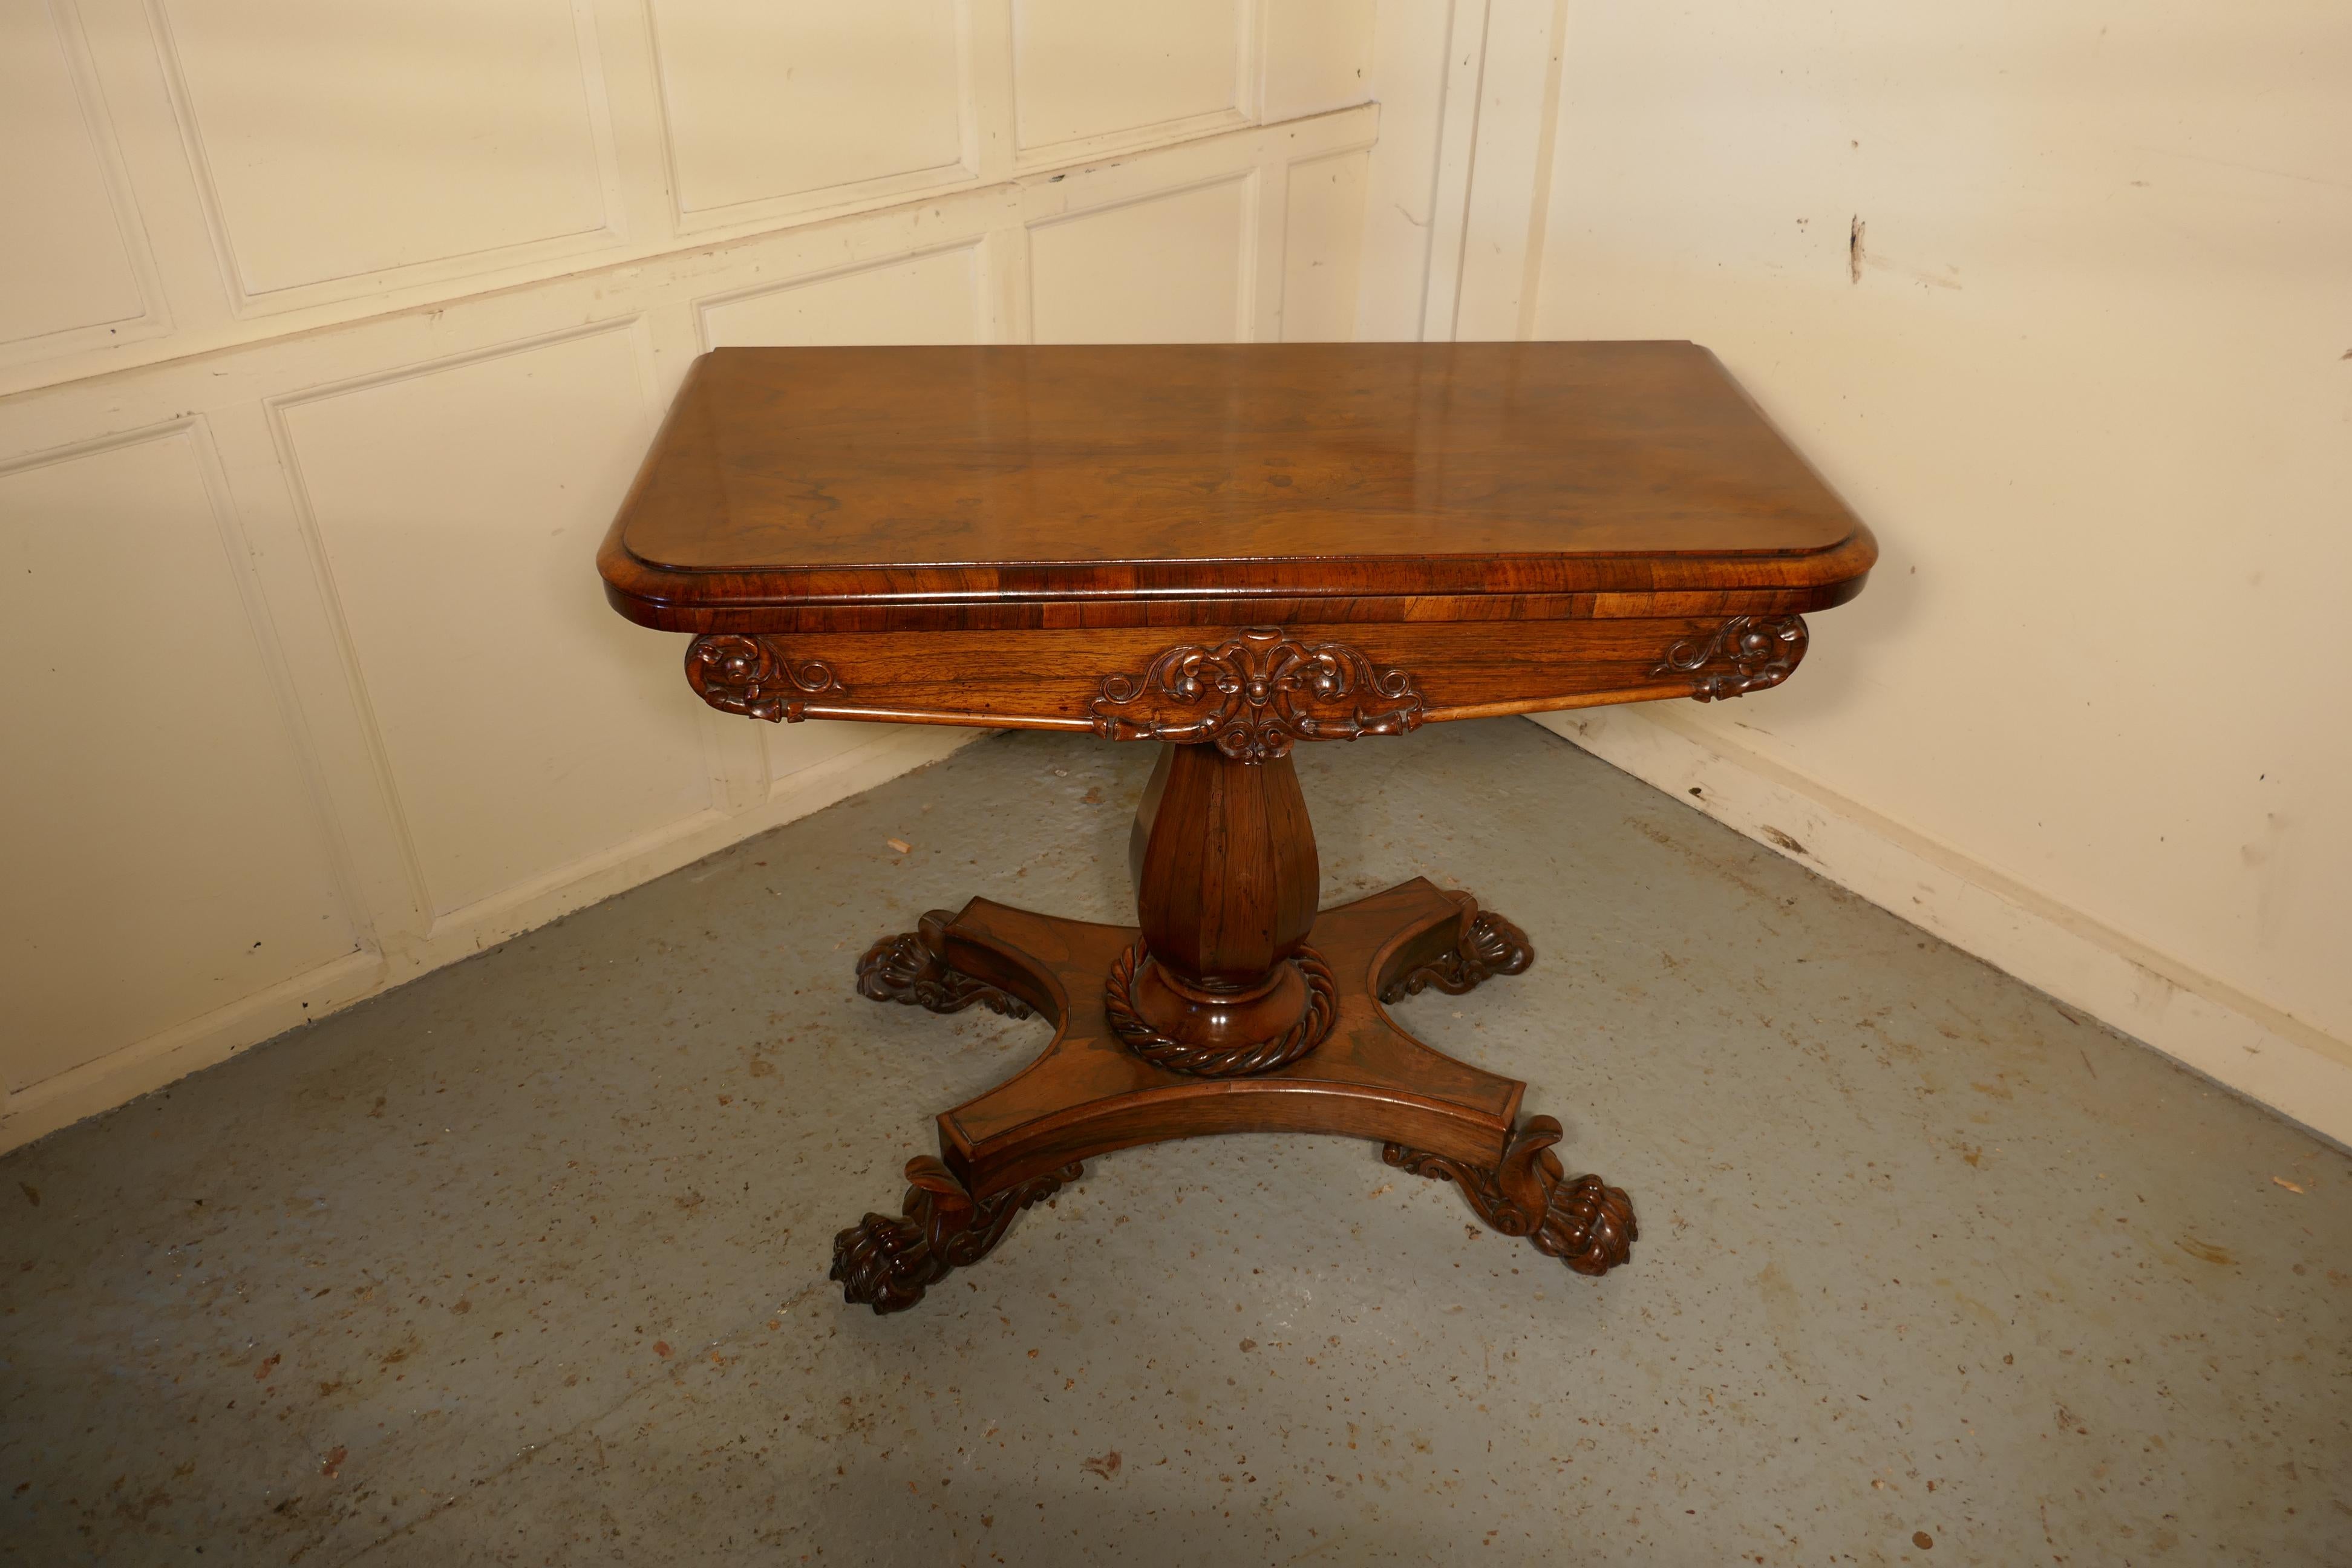 Superb WilliamIV Folding Games or Card Table

This is an exceptionally fine quality piece with beautiful patina, it takes up little space and unfolds to a 3ft square games table
The base leg and apron of the table are carved and decorated, the table